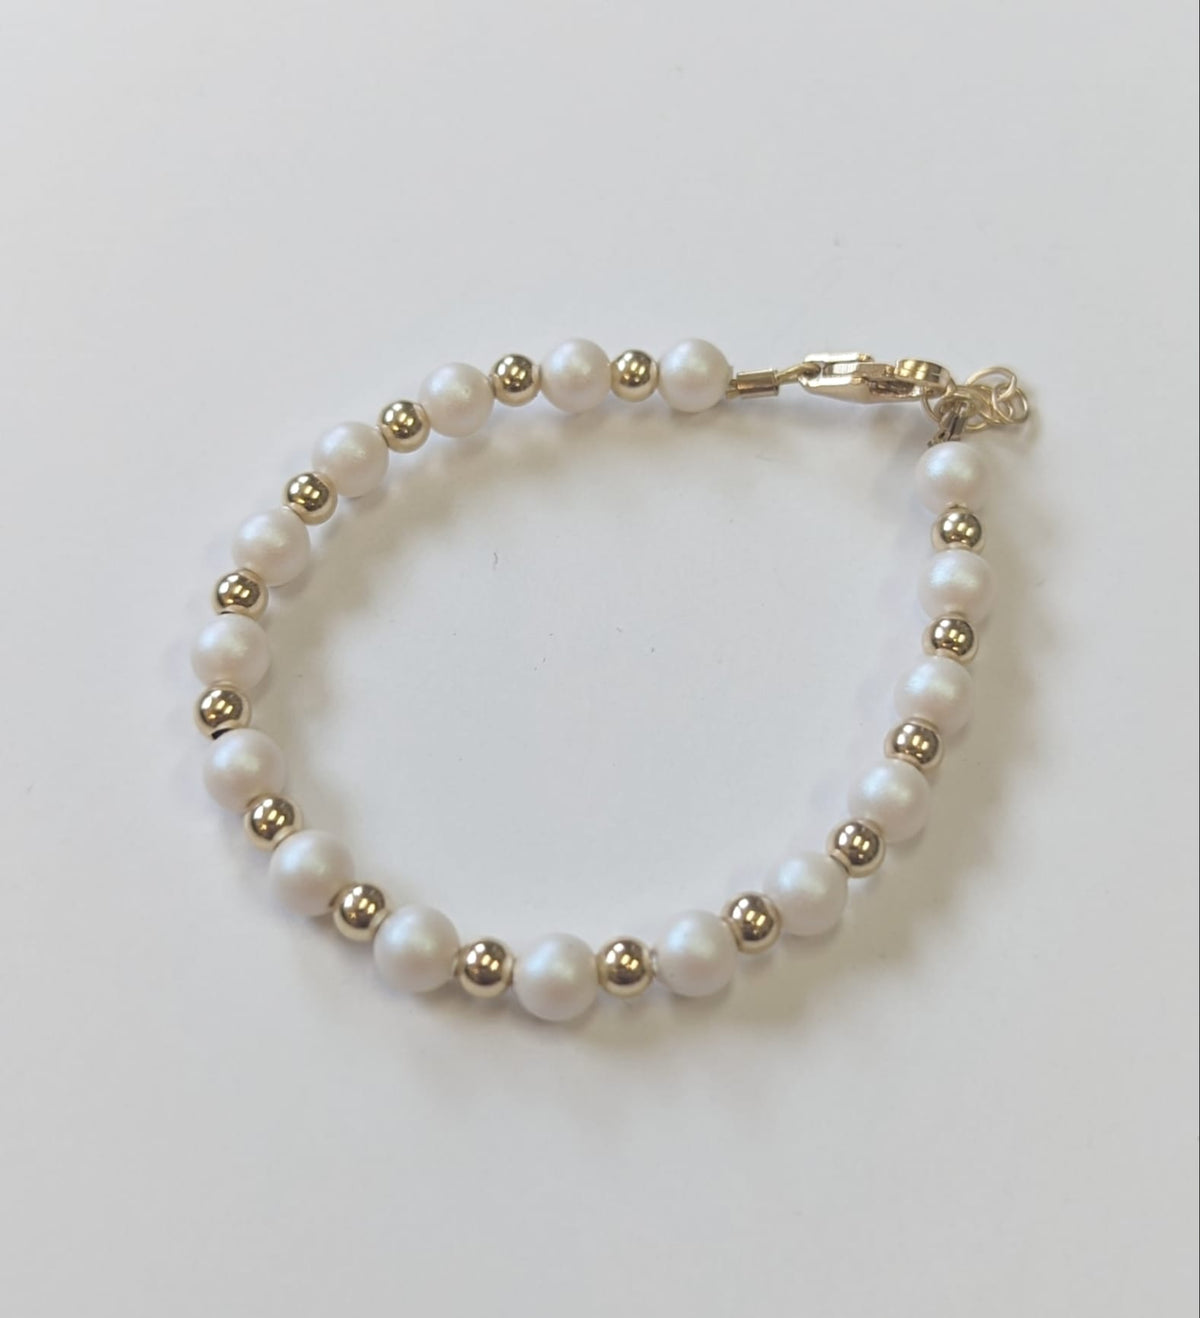 Iridescent white pearl and gold beaded adjustable bracelet